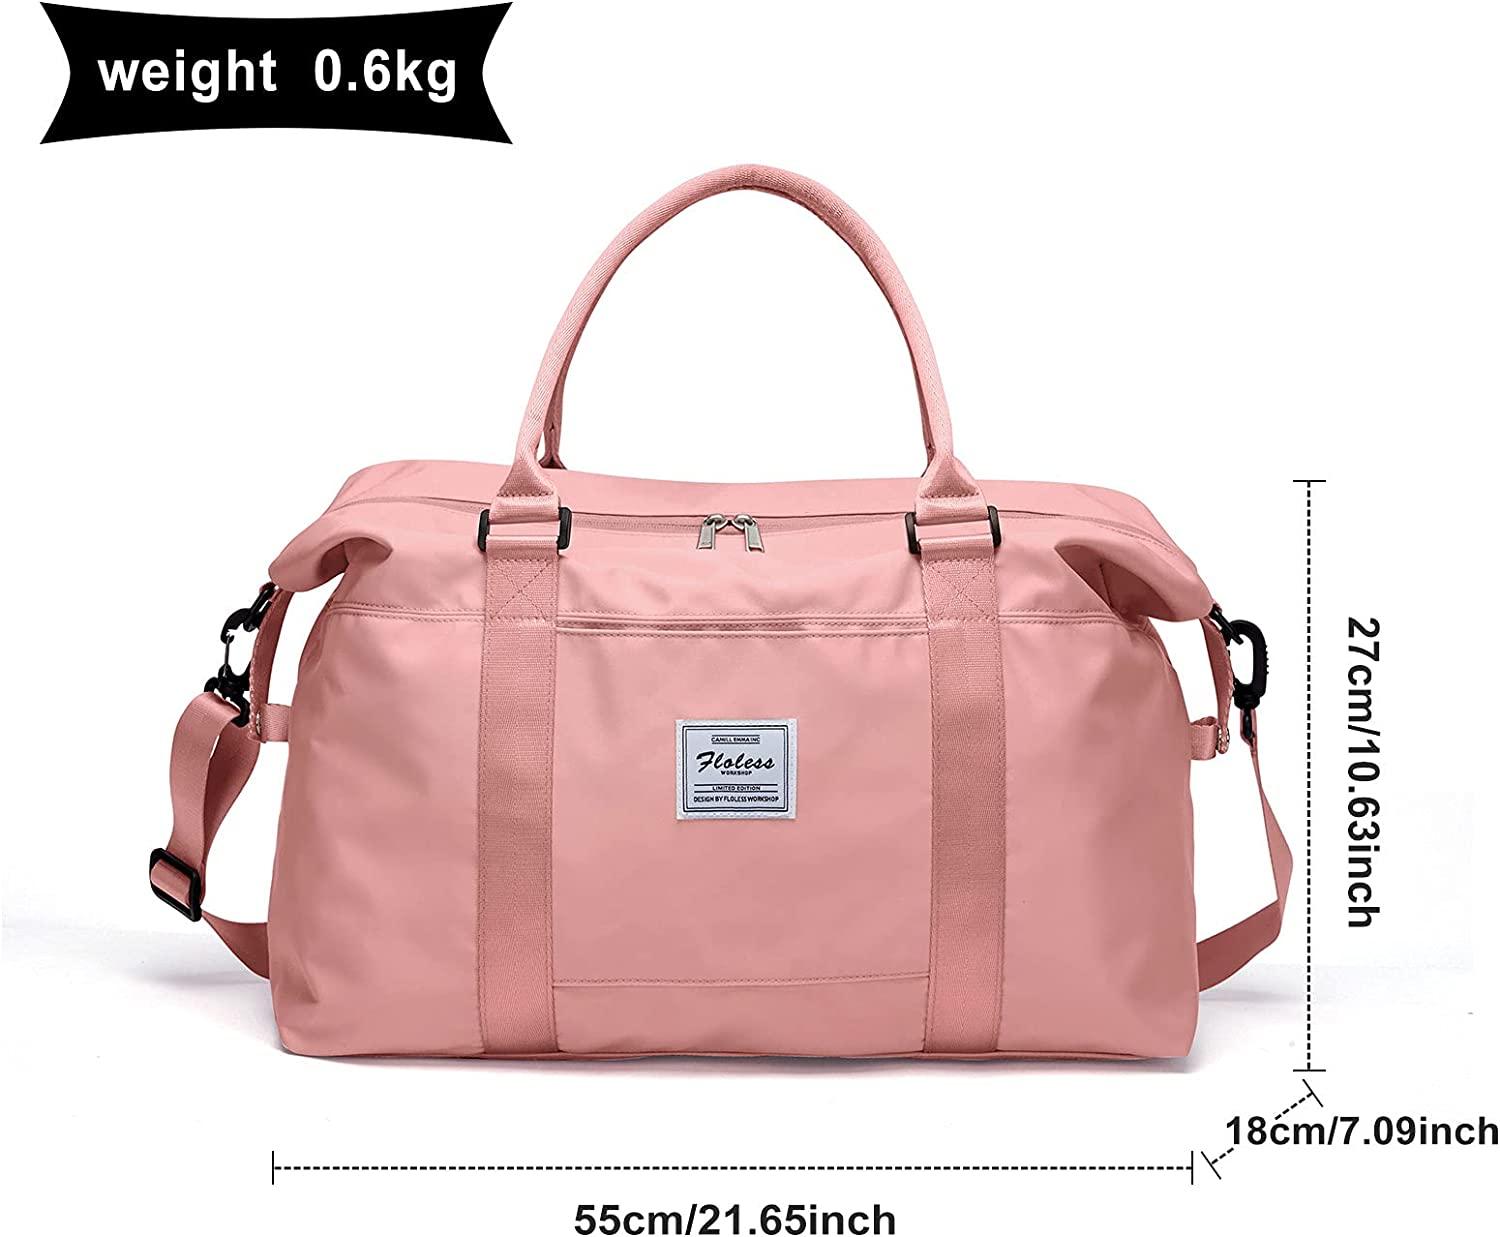 AWG - All Weather Gear 10 litres Sport Polyester Pink Duffle Gym Bag :  Amazon.in: Bags, Wallets and Luggage